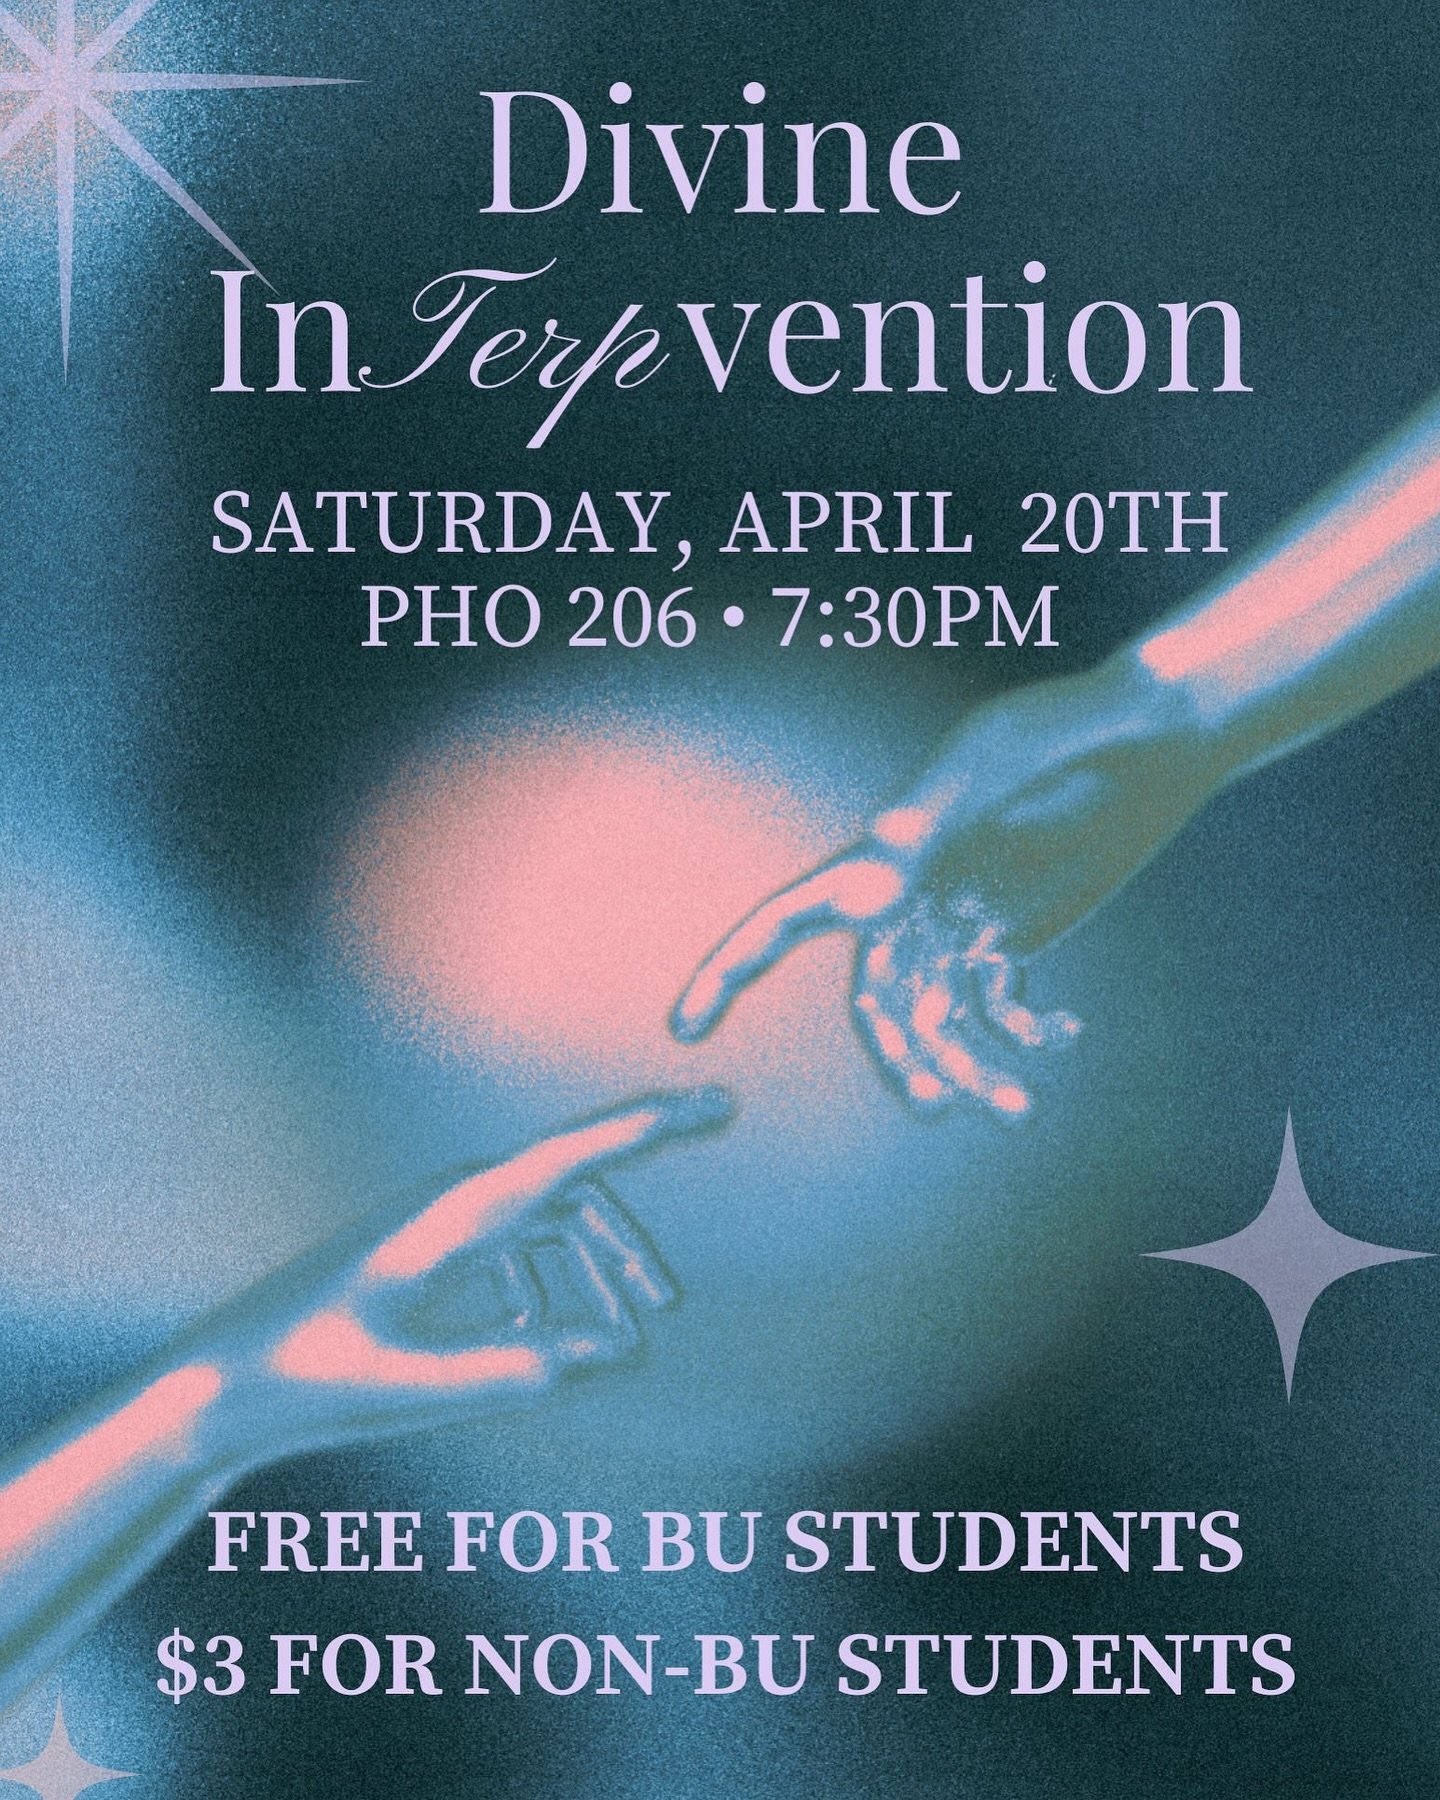 This is a heavenly occasion&hellip; It&rsquo;s time for our final concert of the semester, featuring @buinachord!! Join us in PHO 206 on Saturday, April 20th at 7:30pm to hear some angelic songs. Stay tuned for the ticket link🪽🤍😇